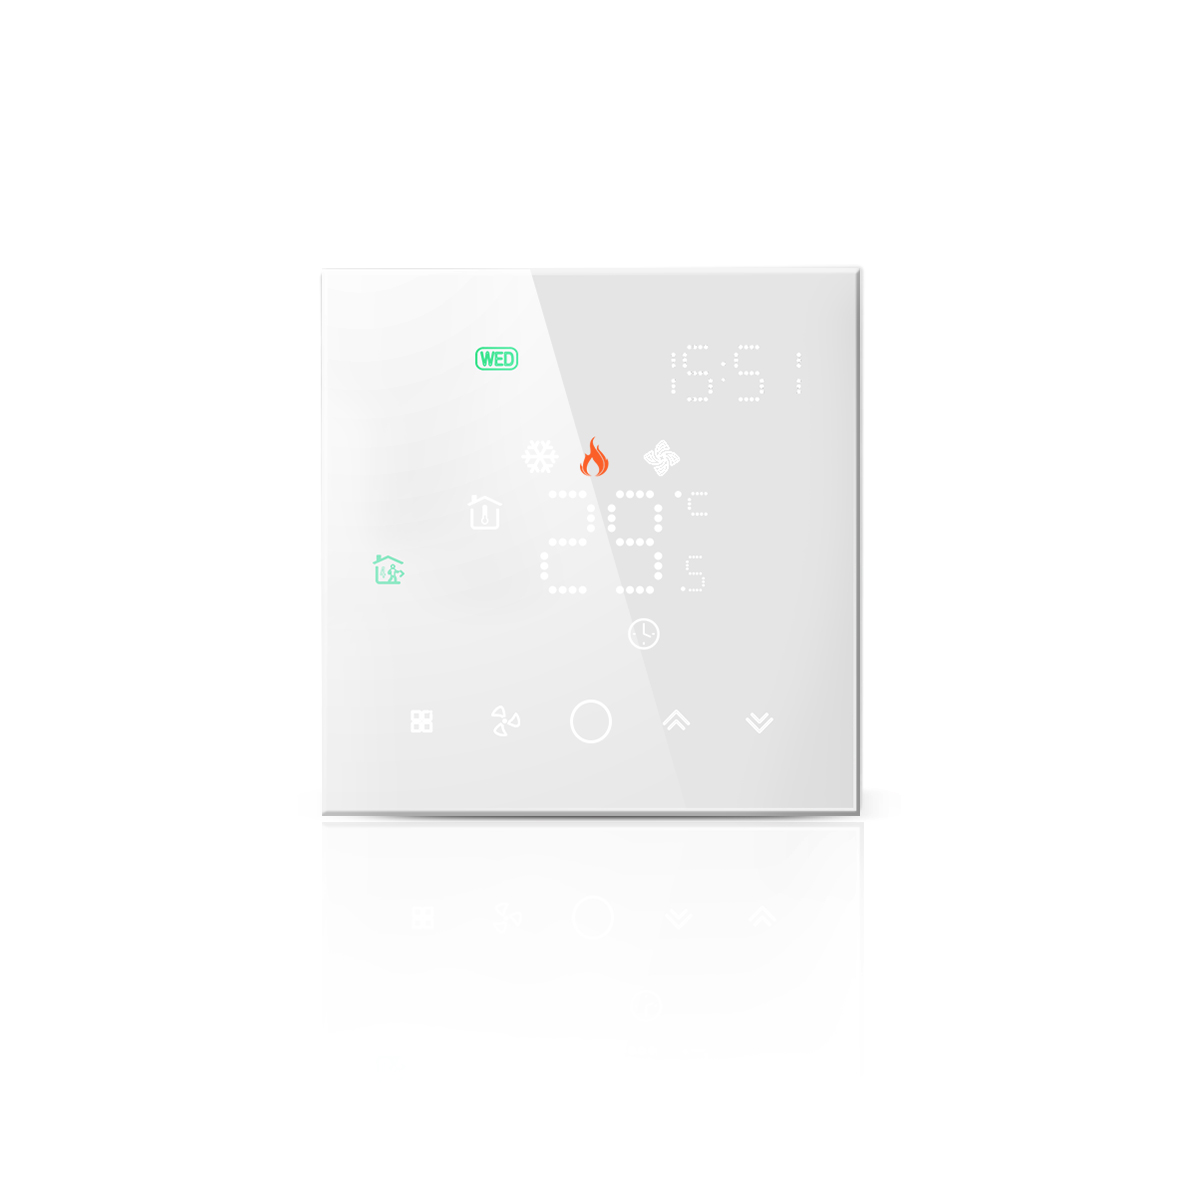 BAC-003  Series Room Smart Thermostat